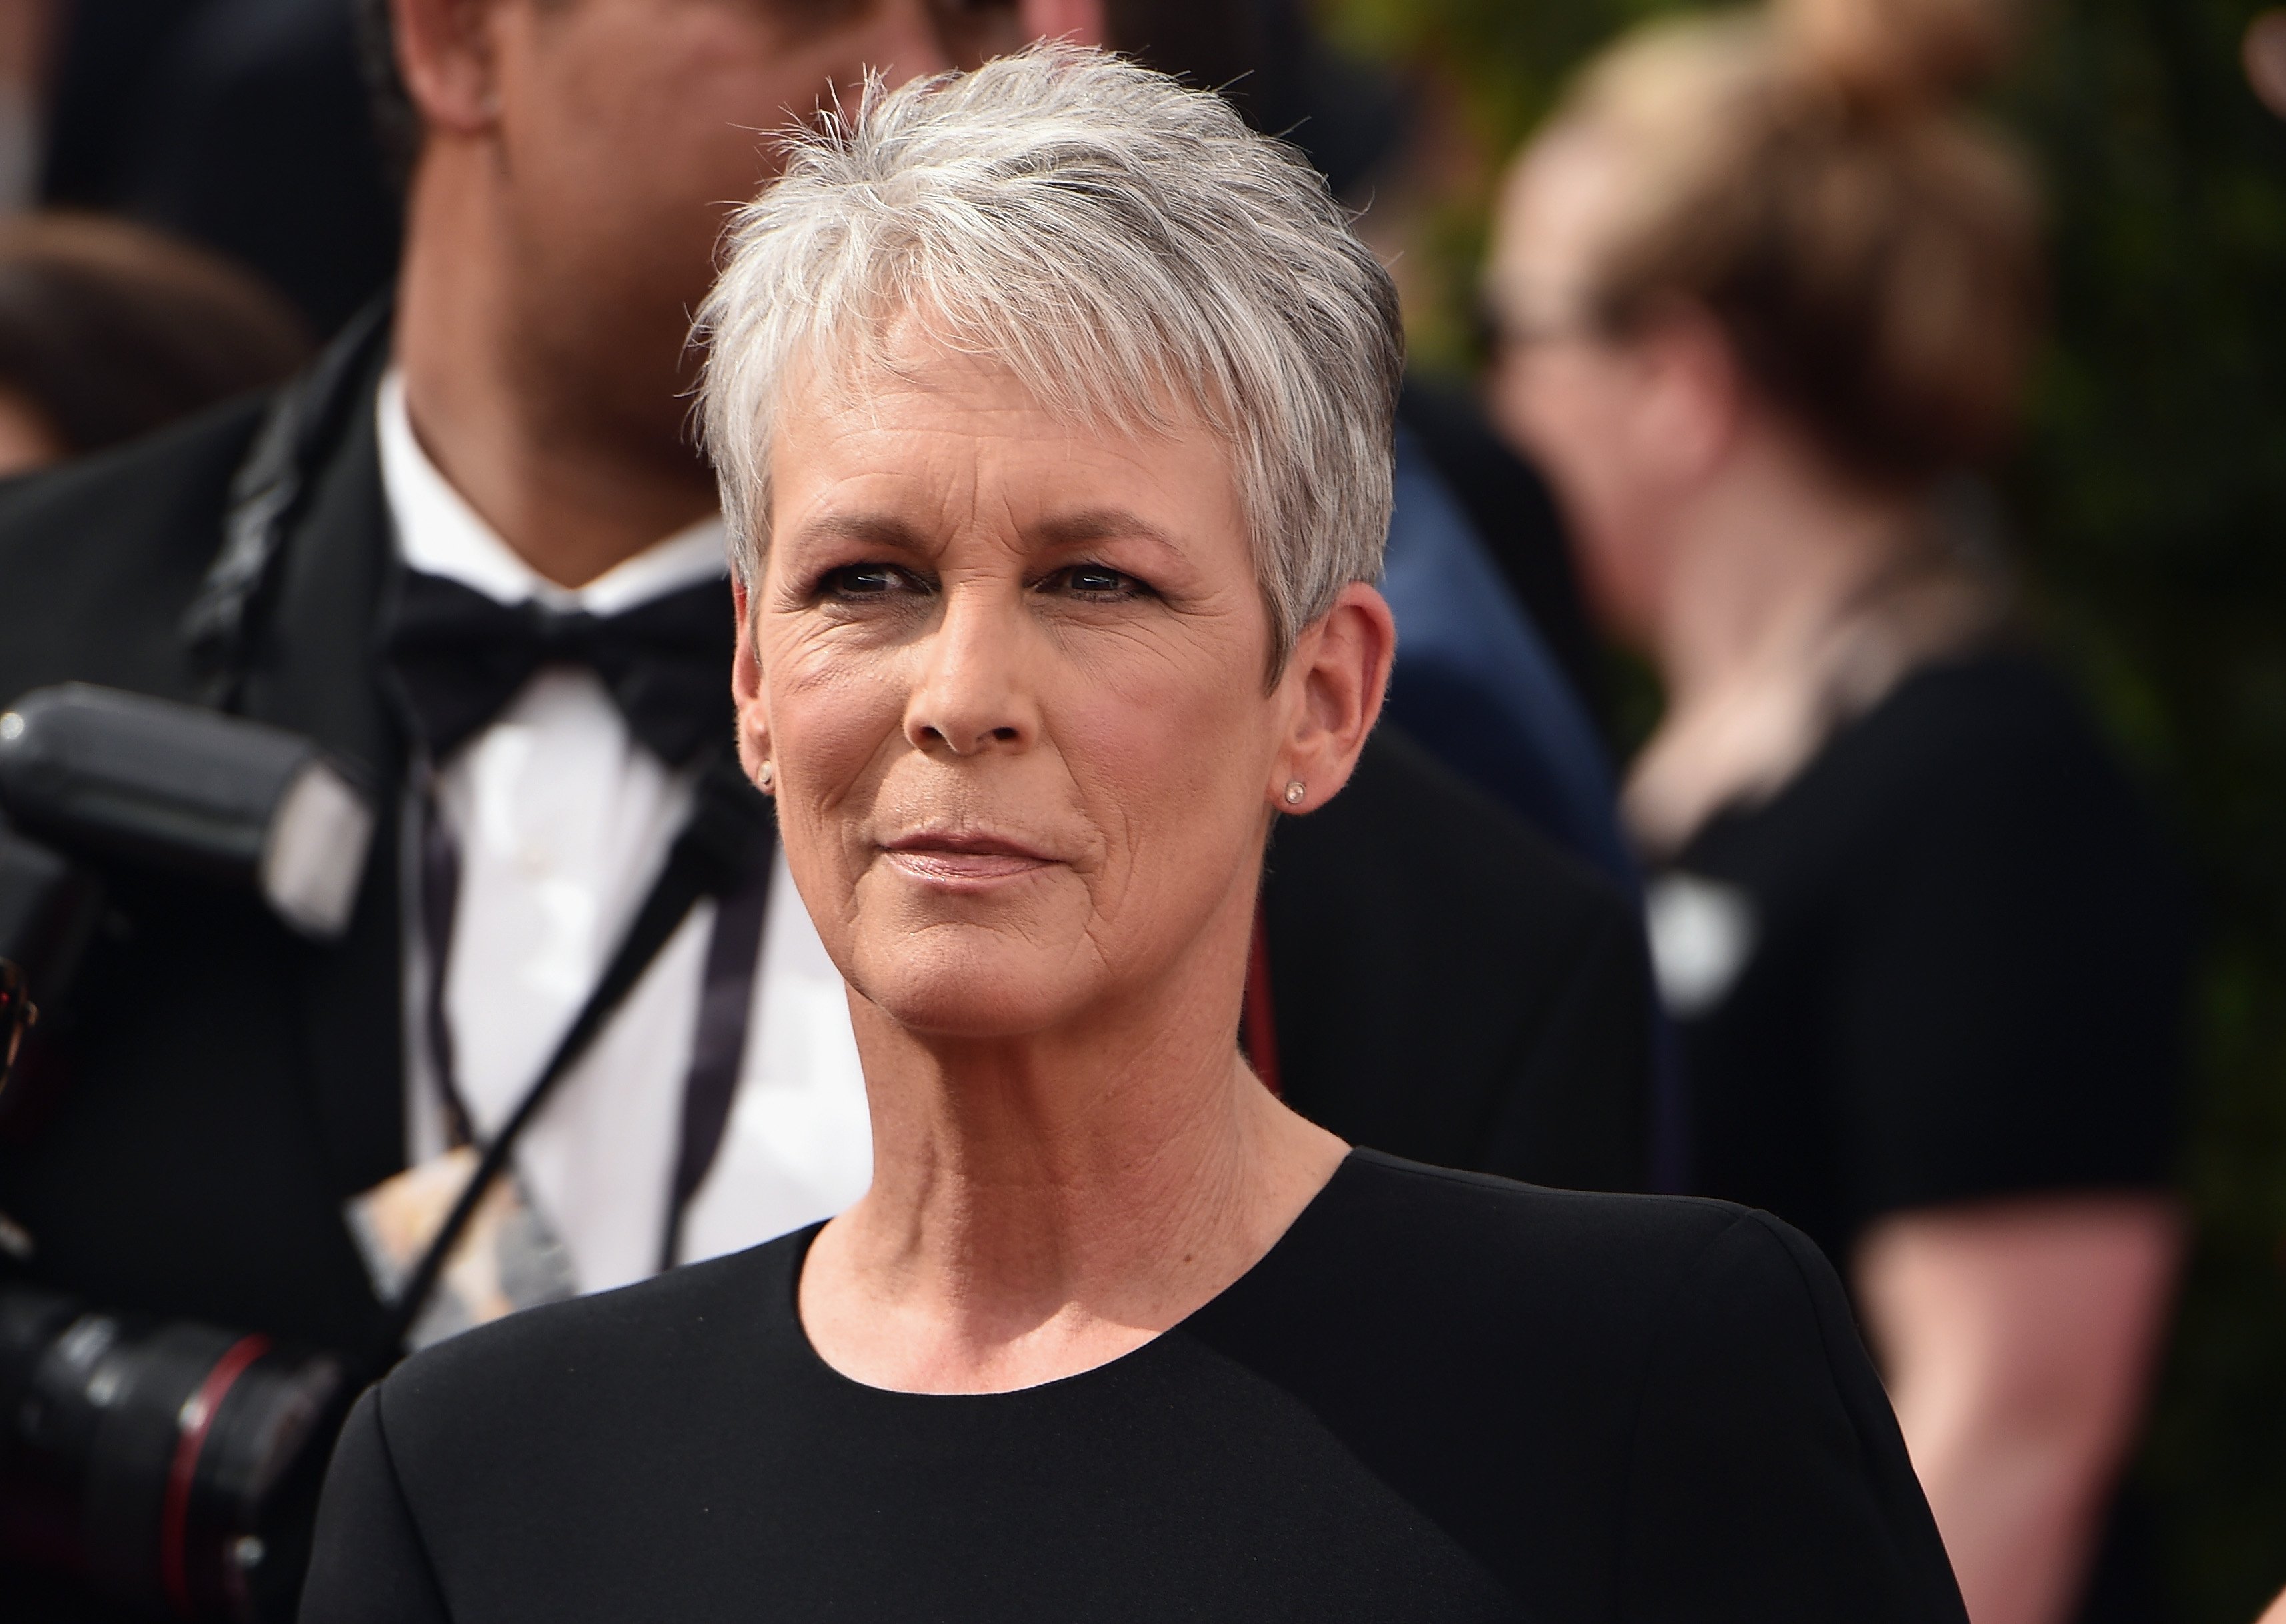 Jamie Lee Curtis attends the 67th Annual Primetime Emmy Awards at Microsoft Theater on September 20, 2015, in Los Angeles, California. | Source: Getty Images